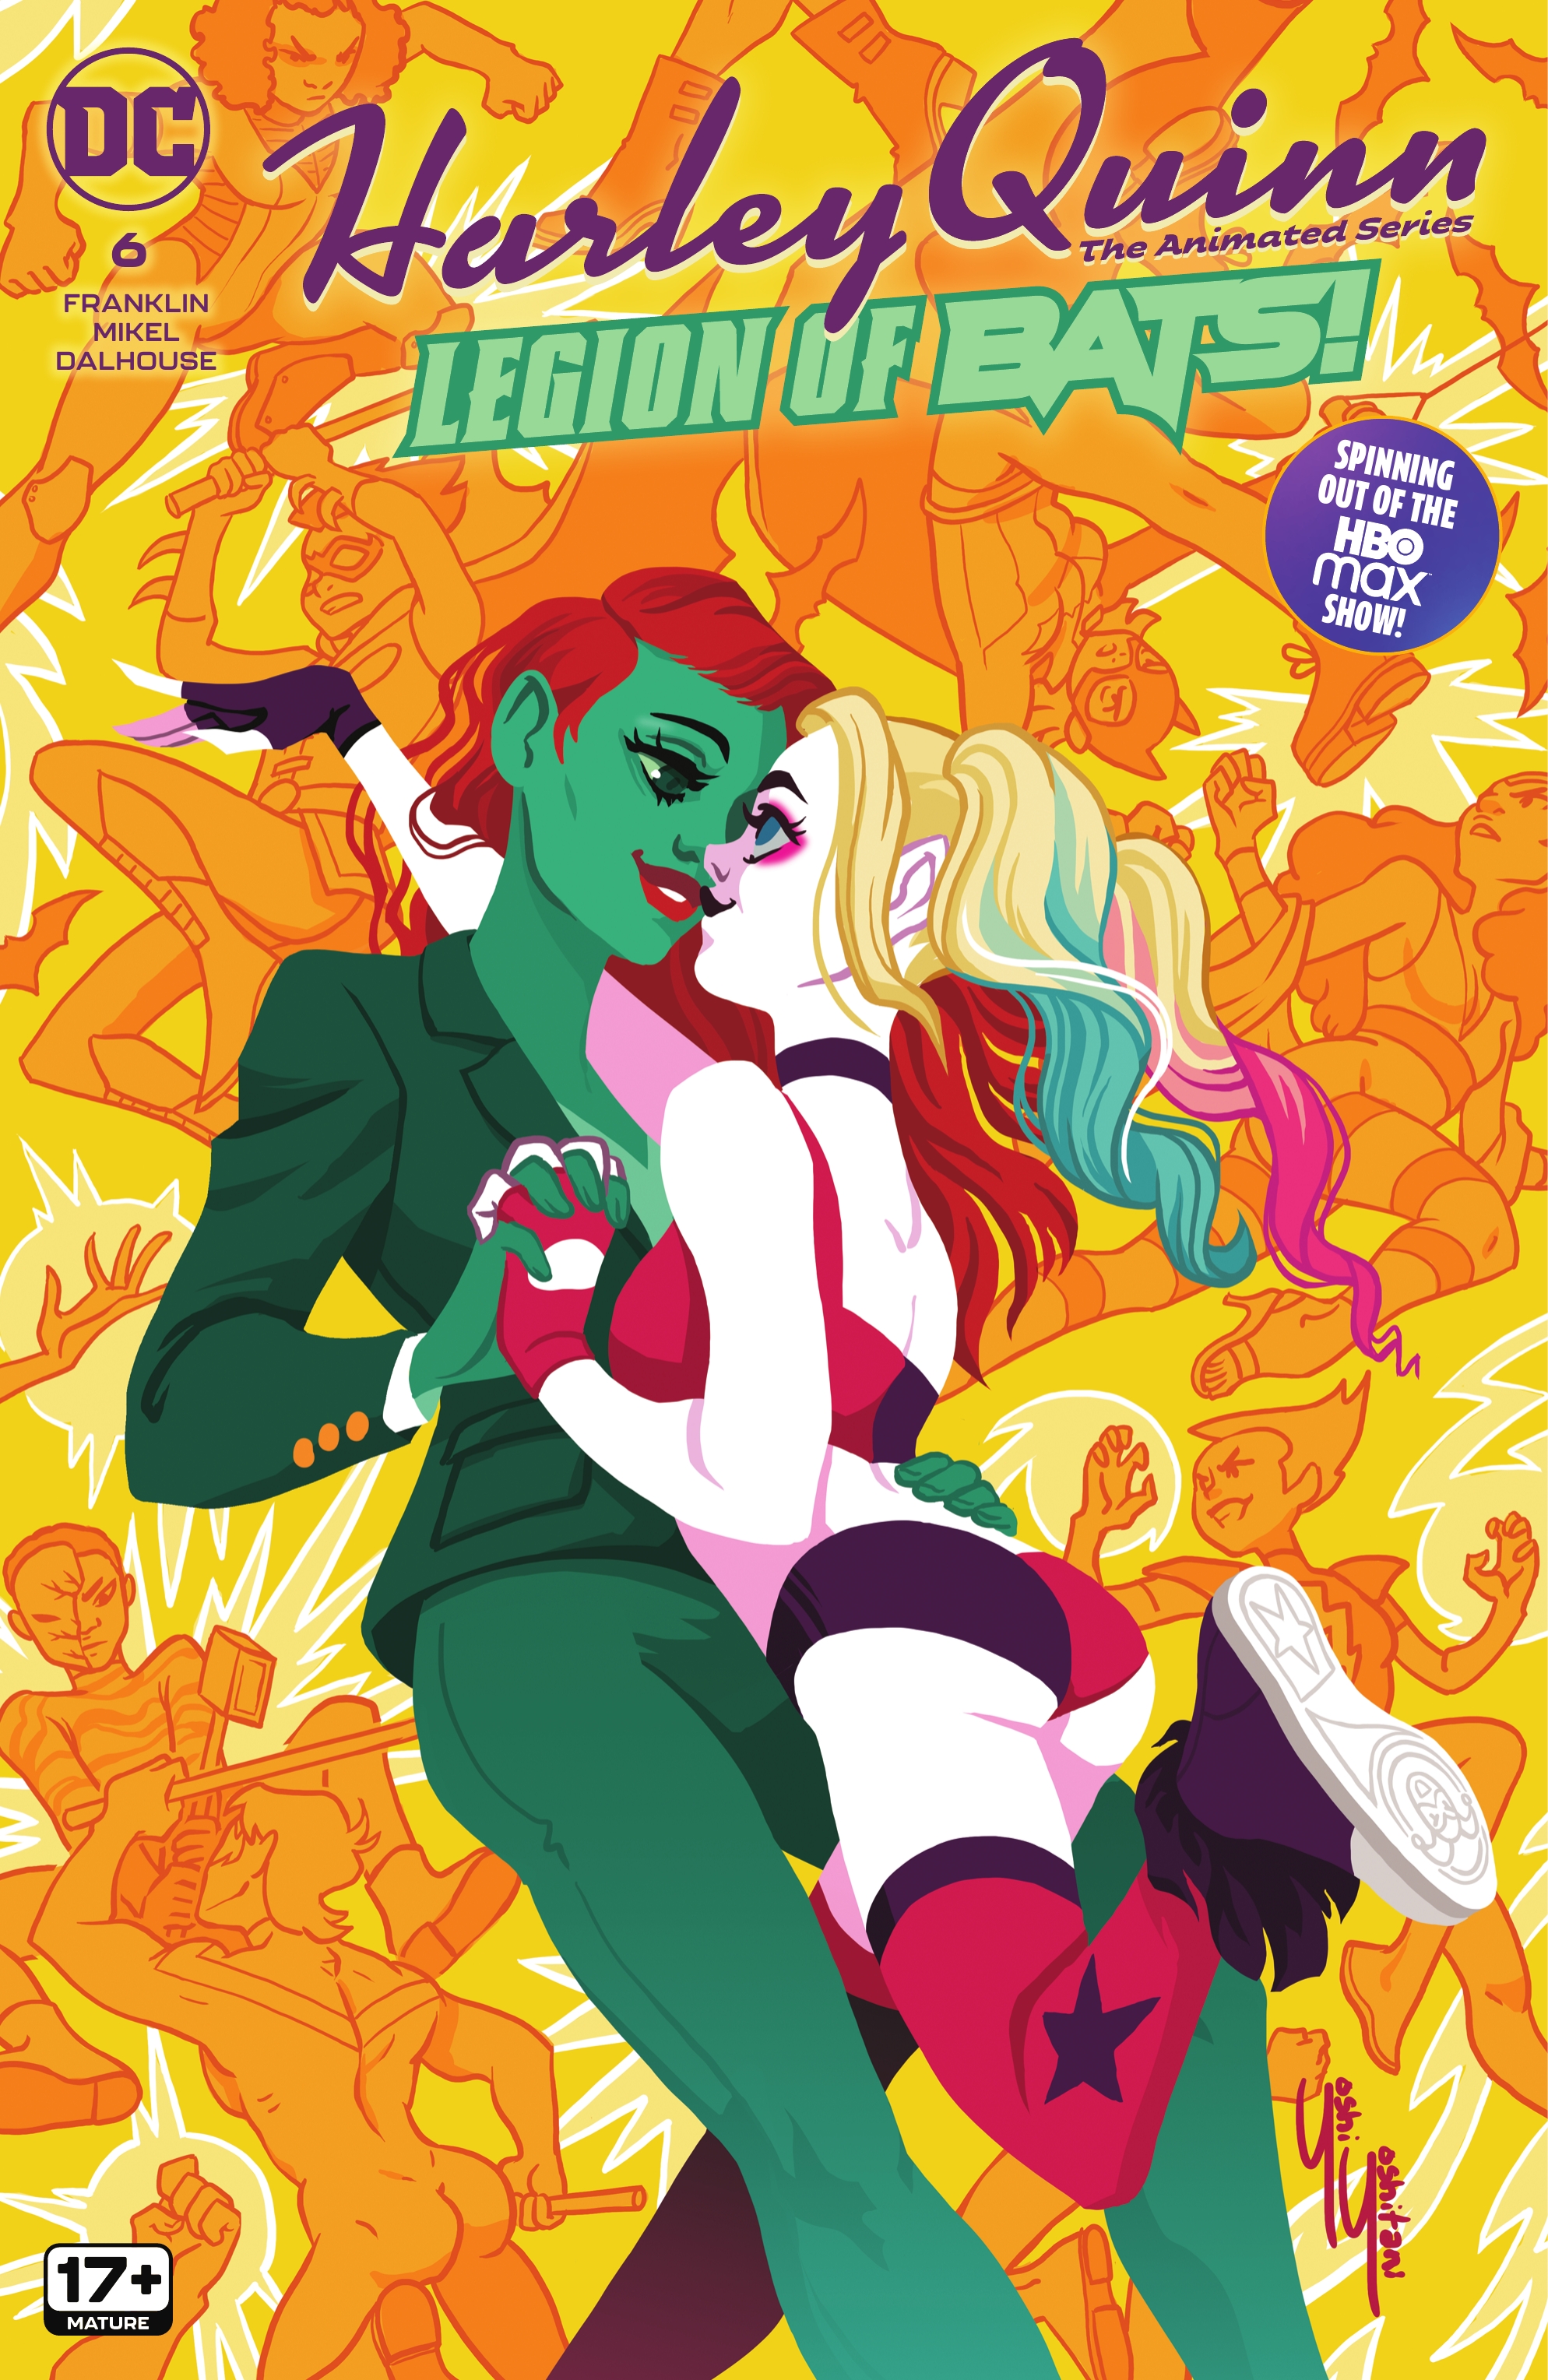 Read online Harley Quinn: The Animated Series: Legion of Bats! comic -  Issue #6 - 1